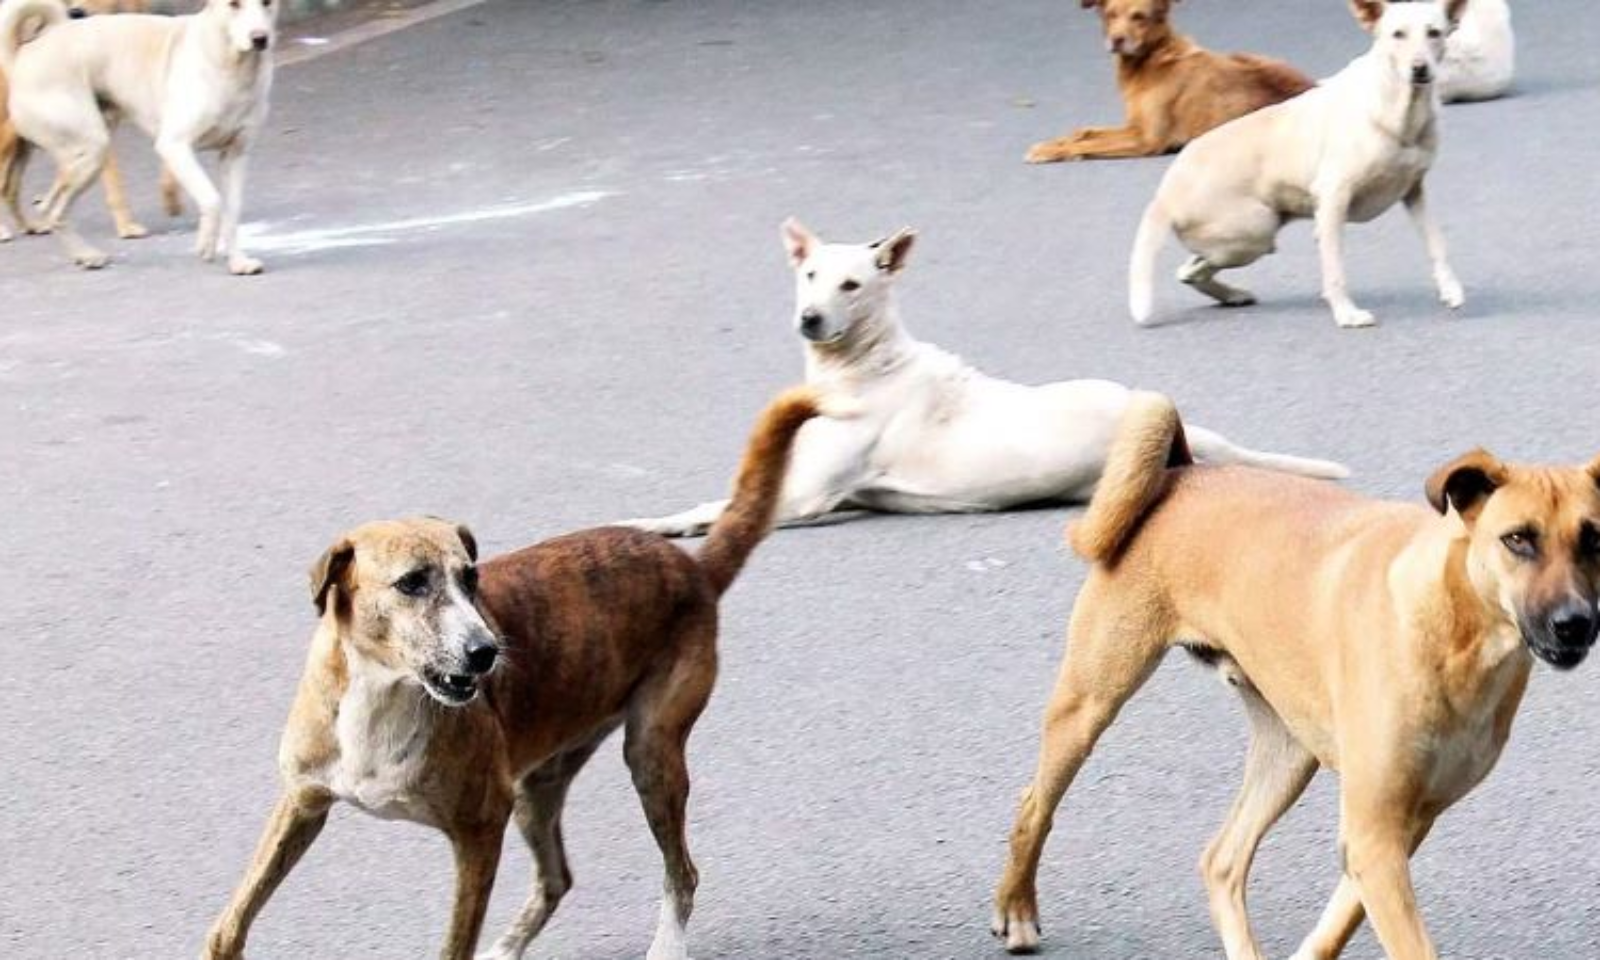 Remove Collars Of Unregistered Stray Dogs: Bombay High Court Directs Nagpur  Civic Body, Seeks Compliance Report